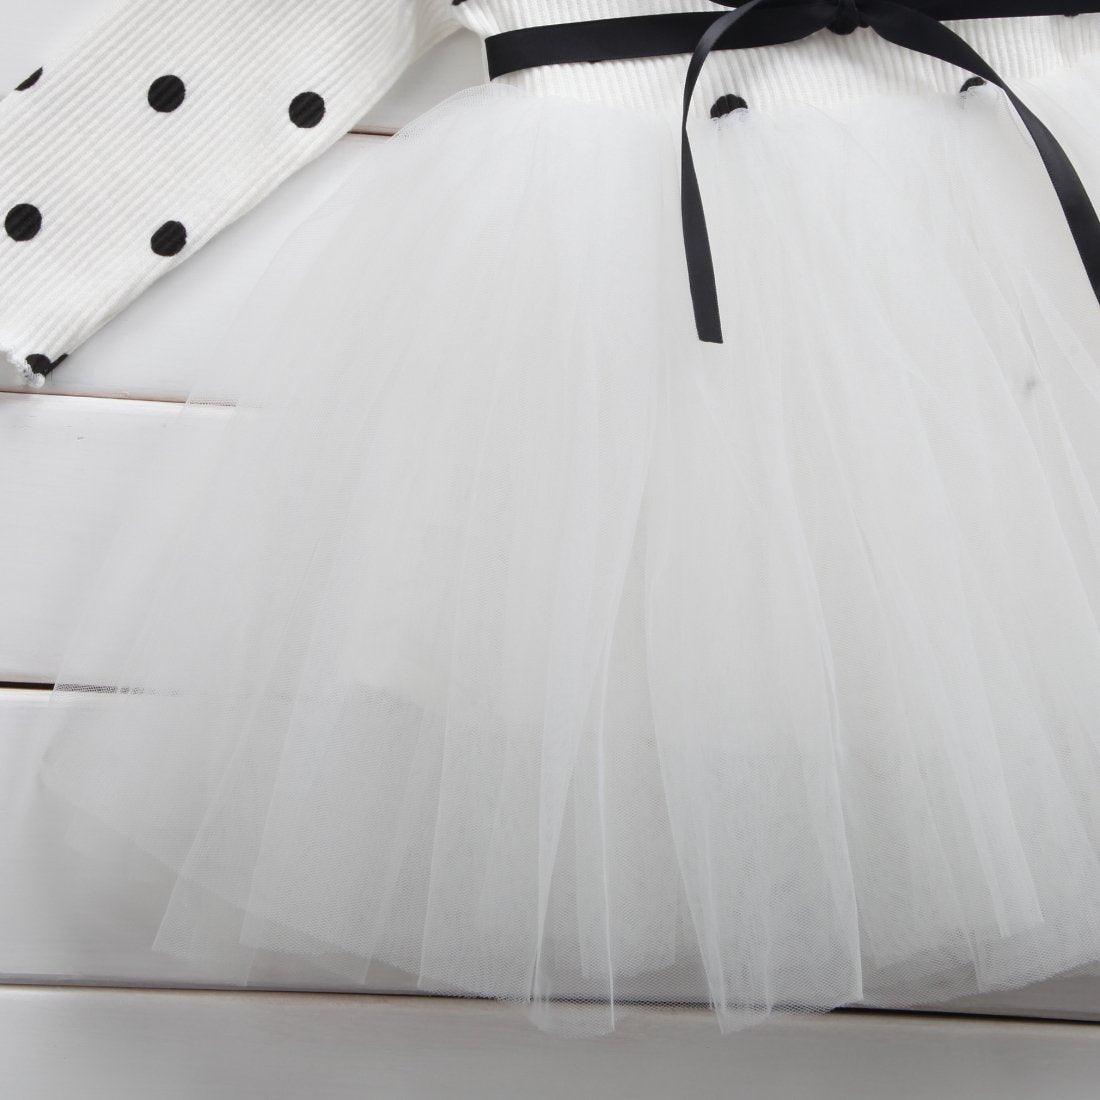 Affordable Baby Girls Lace Tutu Dresses | TrendyAffordables - TrendyAffordables - 0